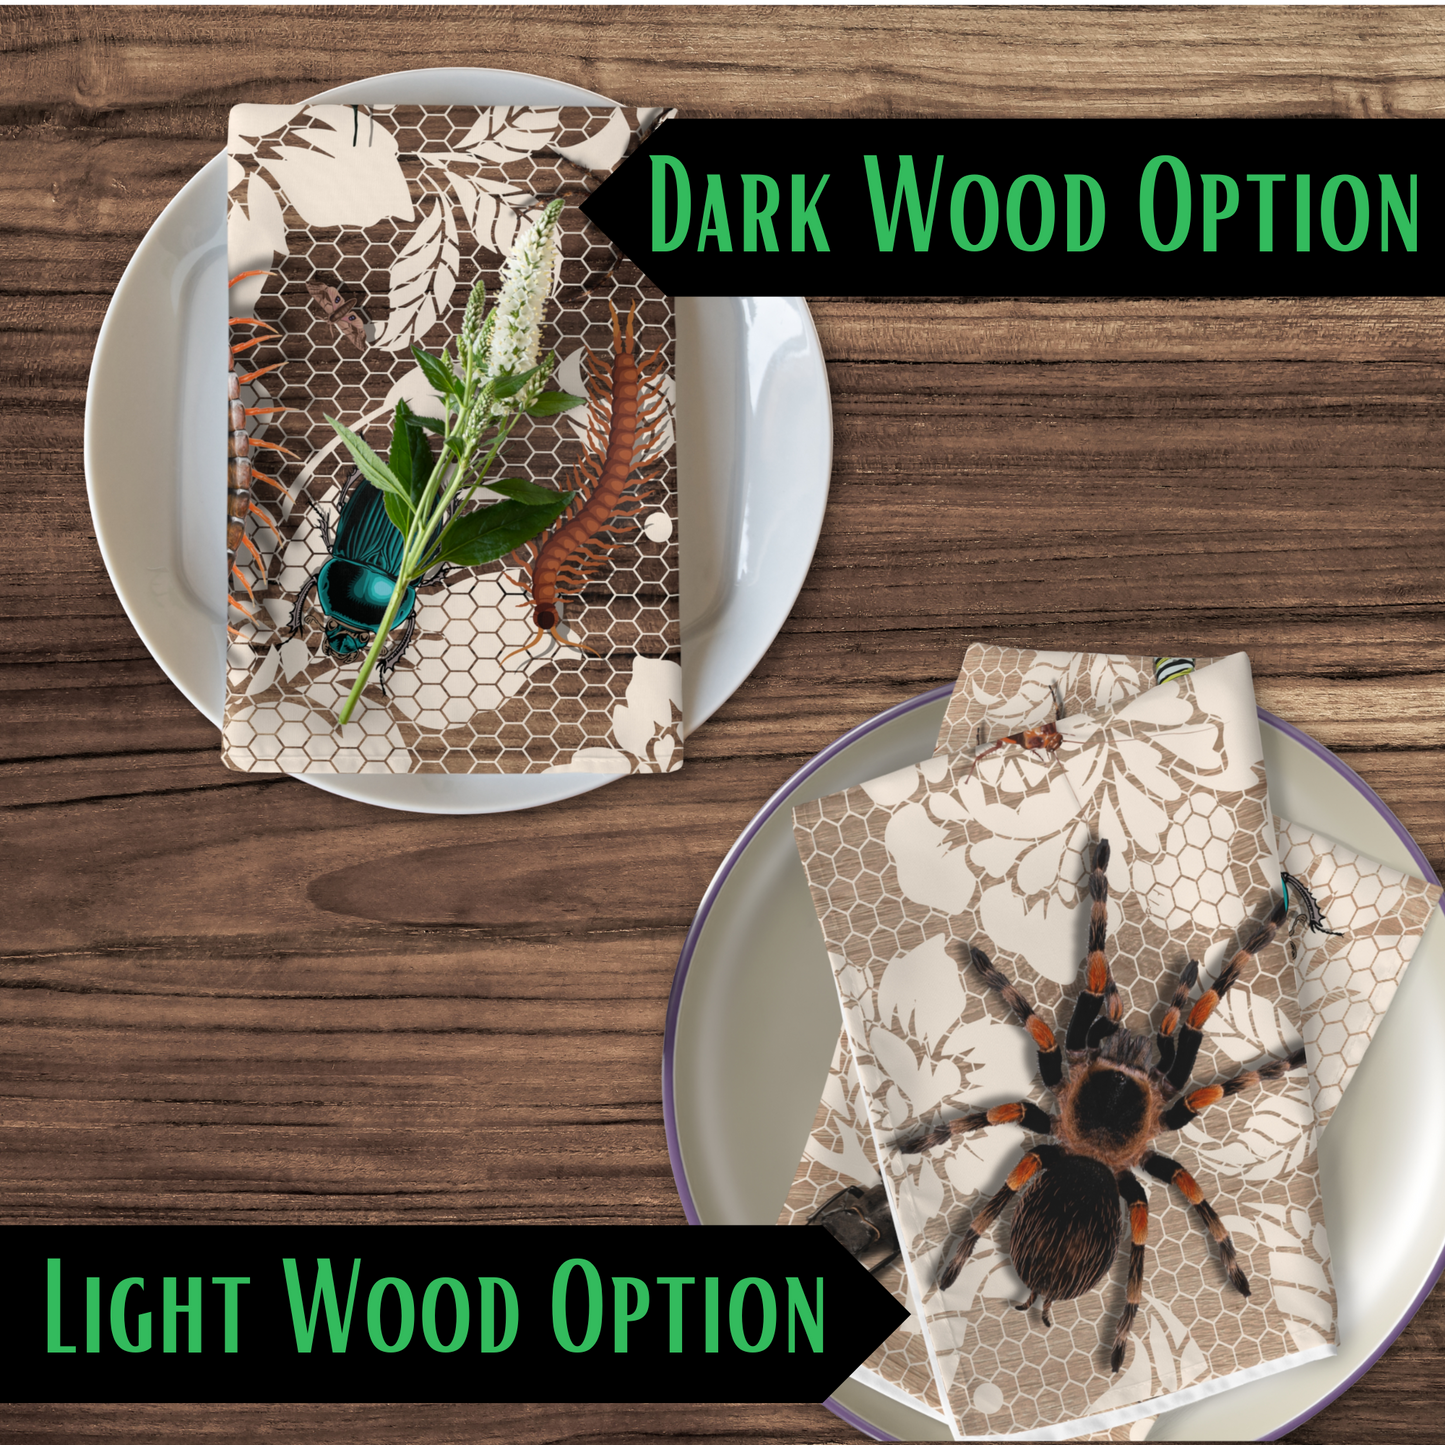 Insect and Lace 4 piece napkin set horror decor creepy table linens horror party decor insect decor table setting creepy spider gift for her housewarming horror gift